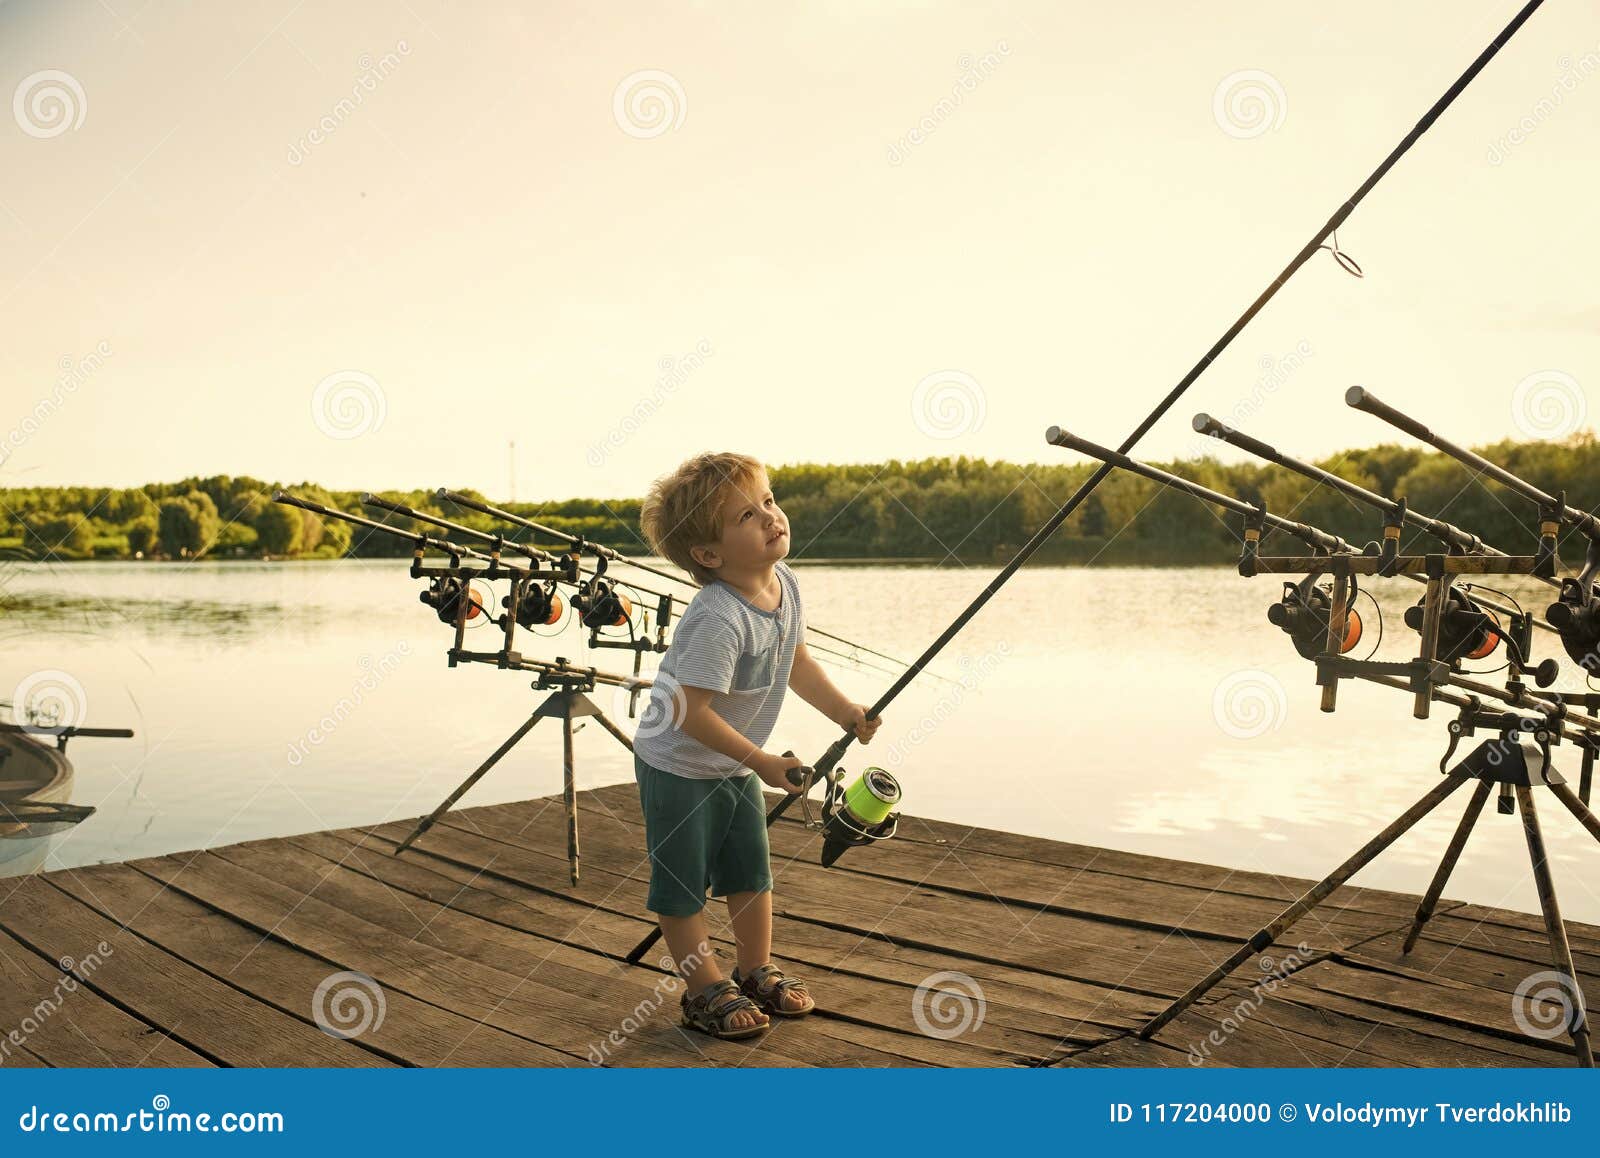 Happy Kid Having Fun. Angling Child with Fishing Rod on Wooden Pier Stock  Photo - Image of learn, education: 117204000